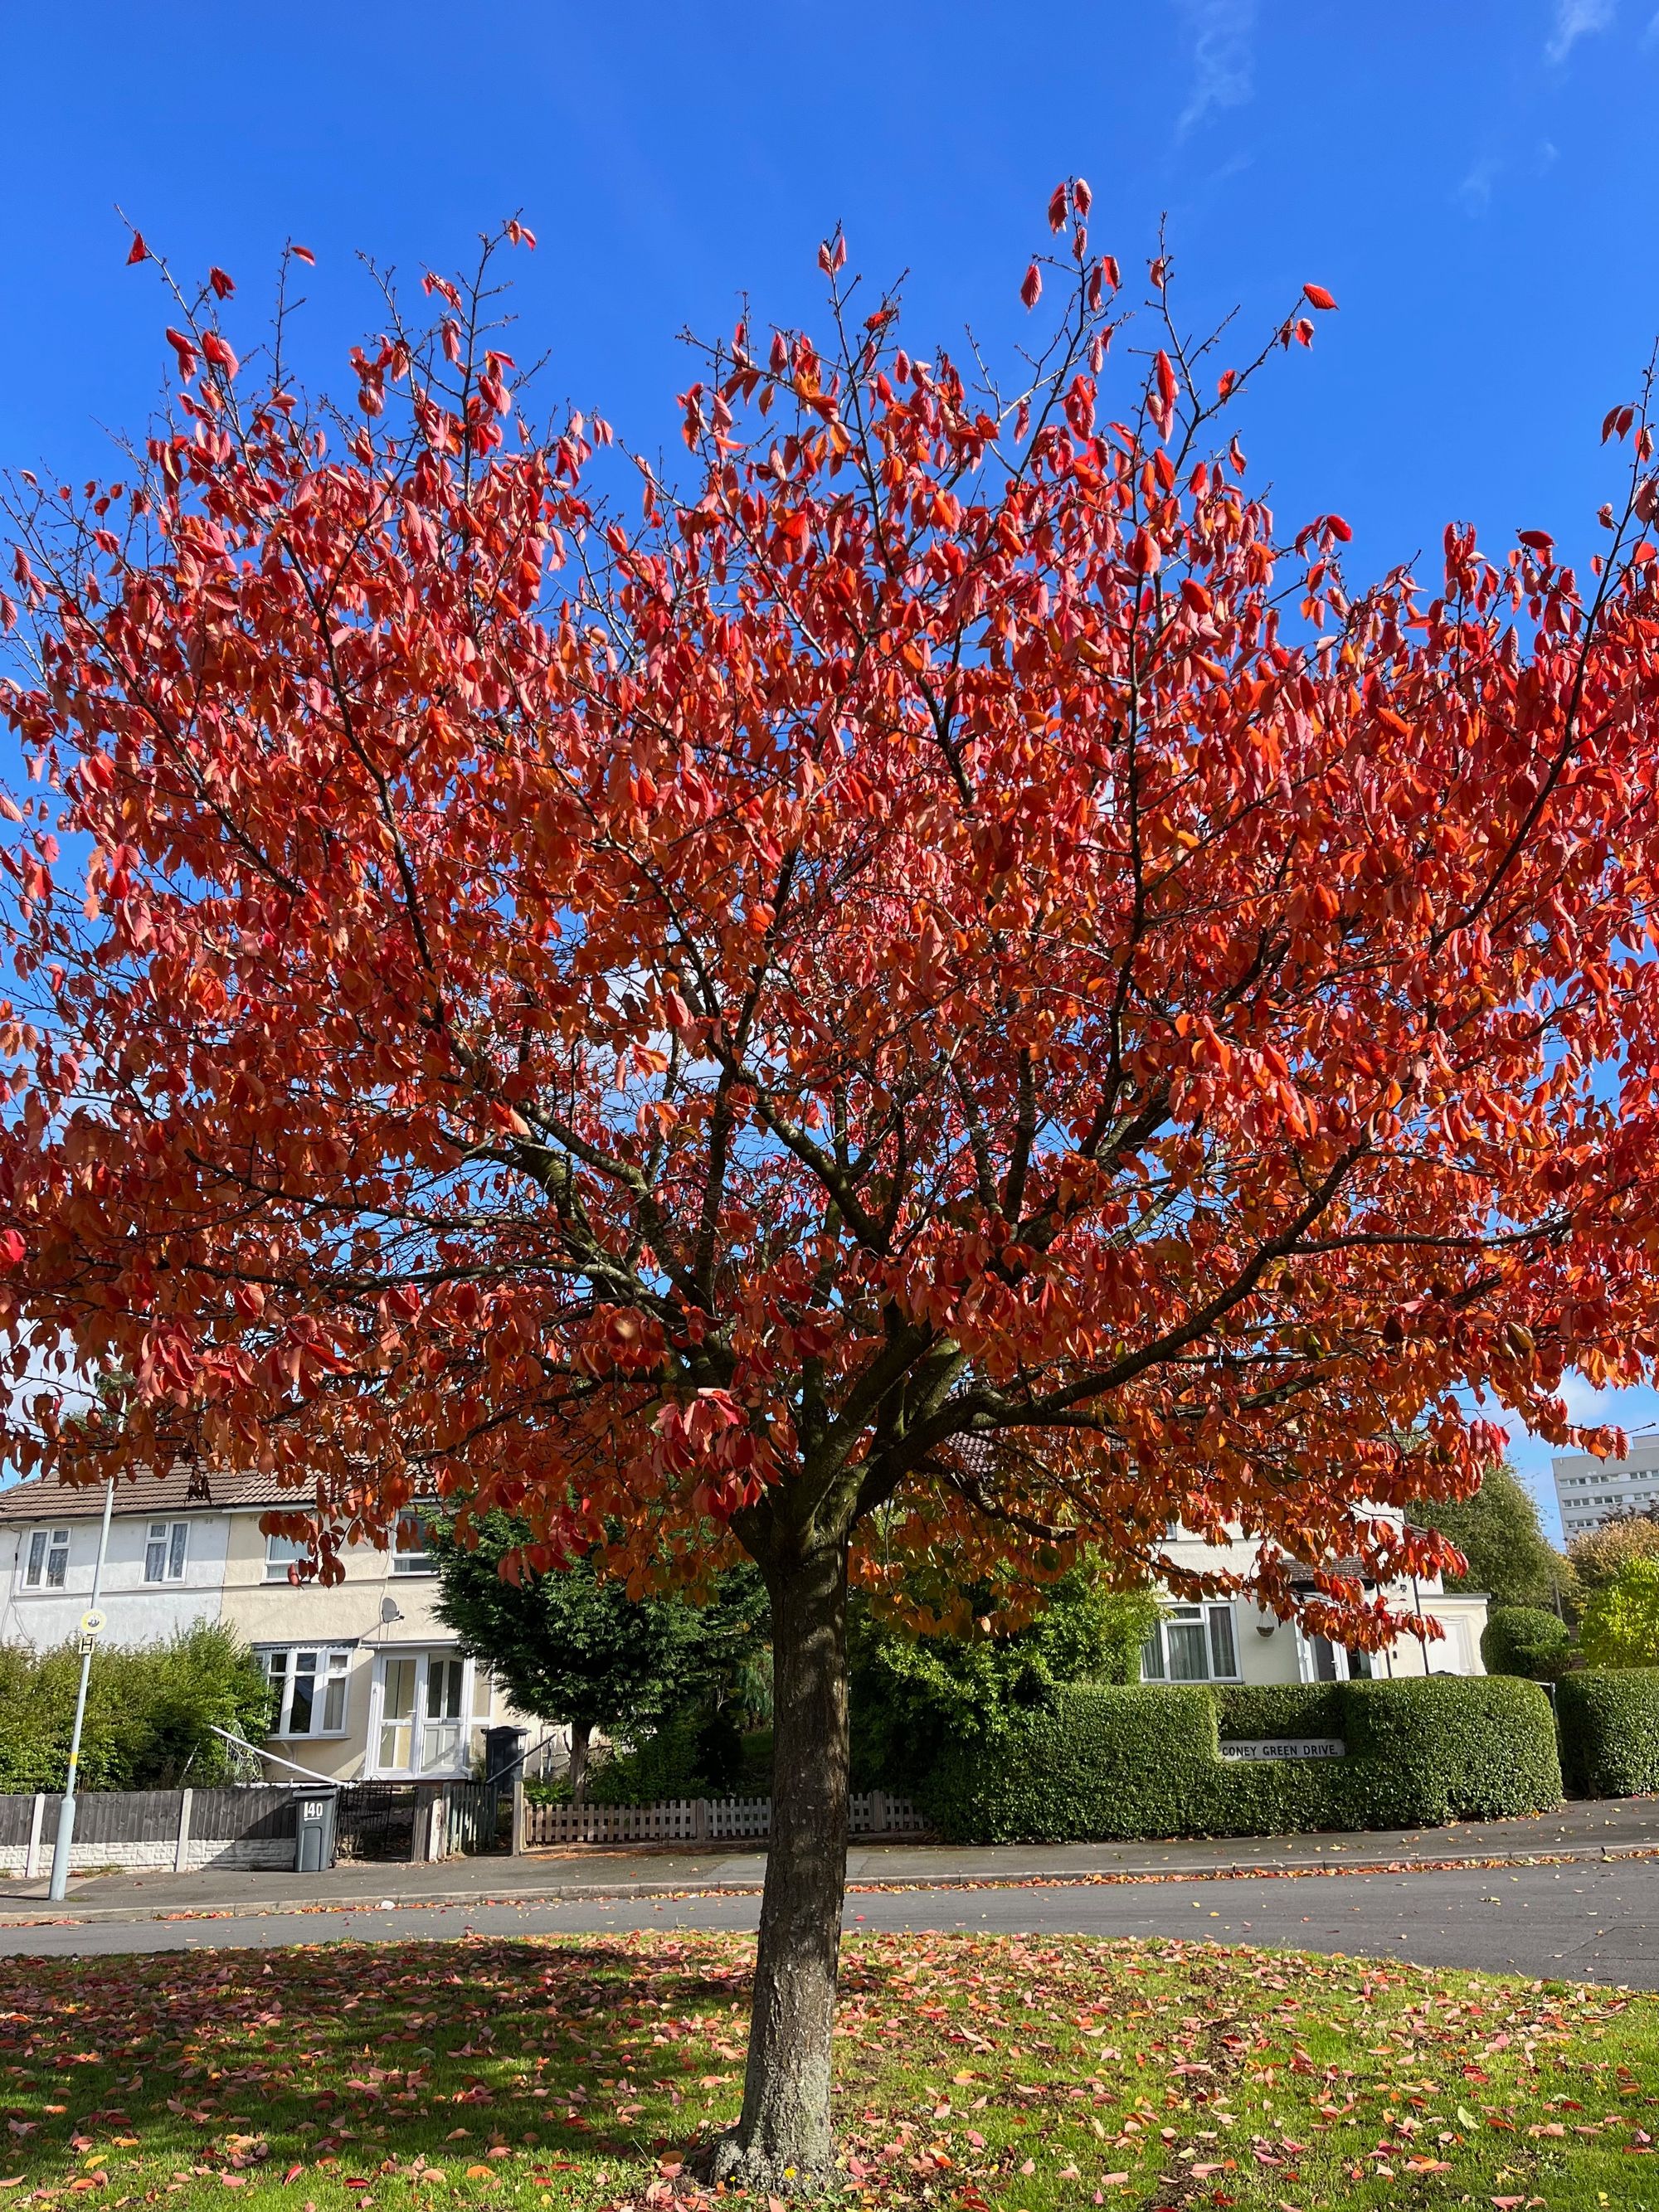 A tree with red leaves on a grass verge. Some houses and a road beyond. The sky is blue